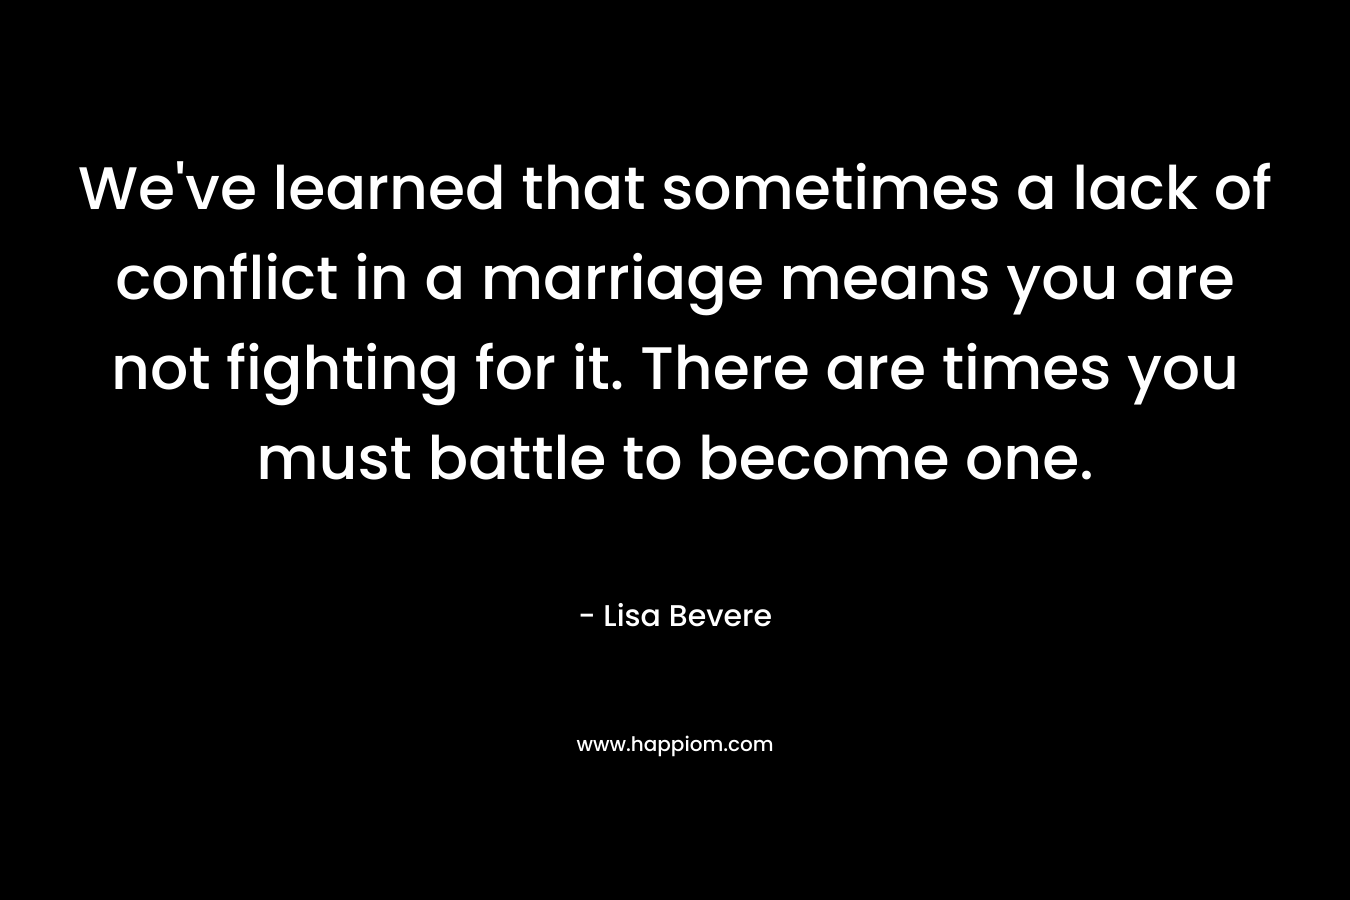 We’ve learned that sometimes a lack of conflict in a marriage means you are not fighting for it. There are times you must battle to become one. – Lisa Bevere